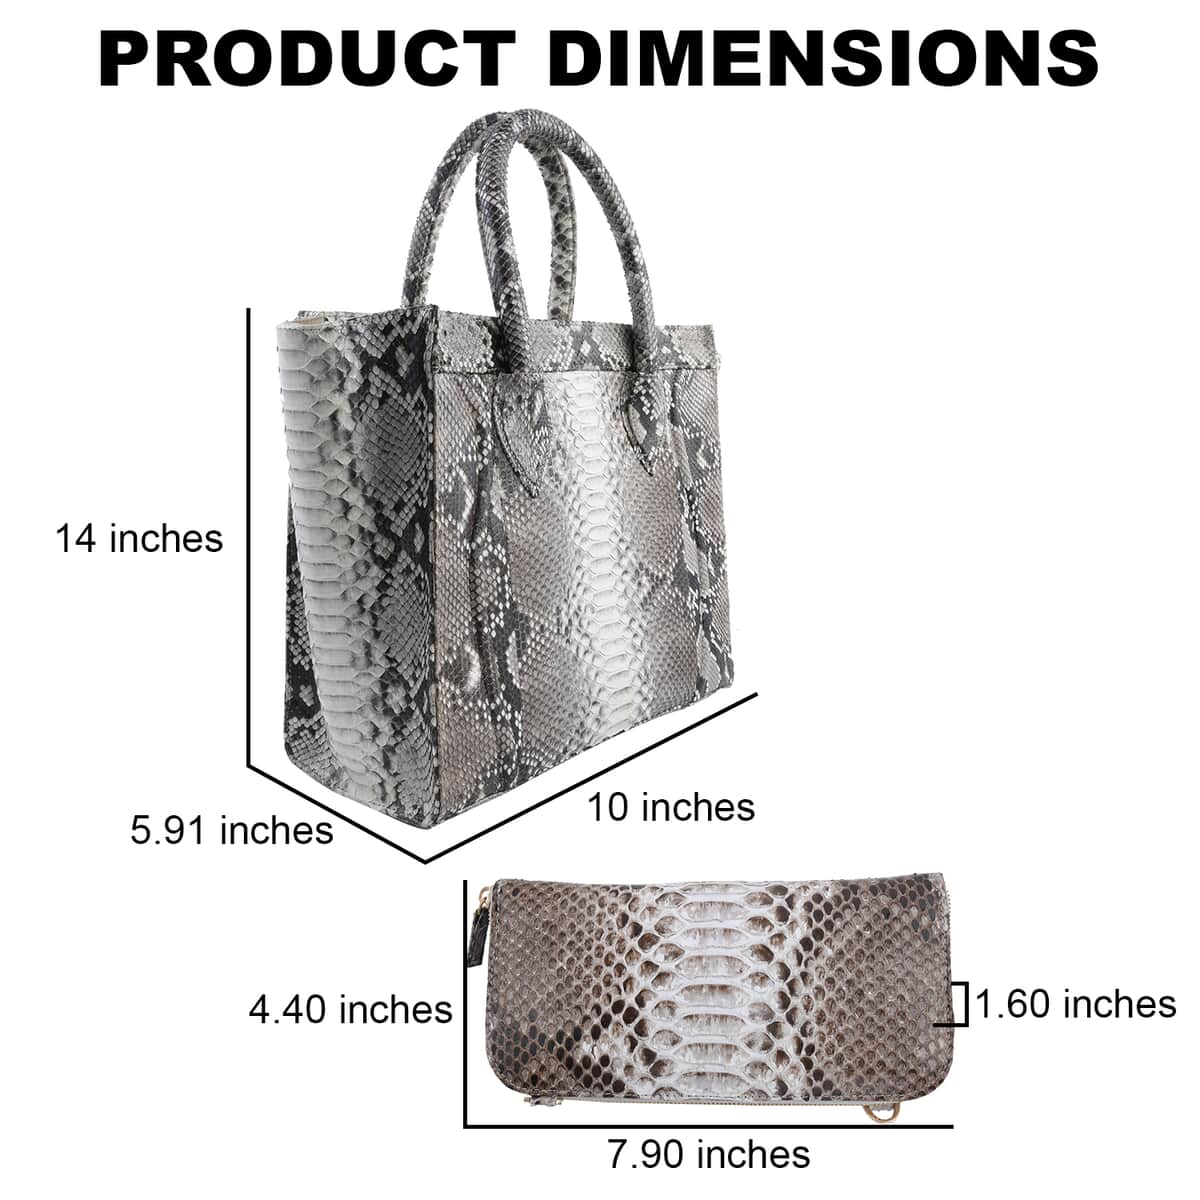 The Grand Pelle Handcrafted Grey with White Color 100 % Genuine Python Leather Tote Bag with Wallet (14.00"x10.00"x5.91") (7.90"x4.40"x1.60") image number 2